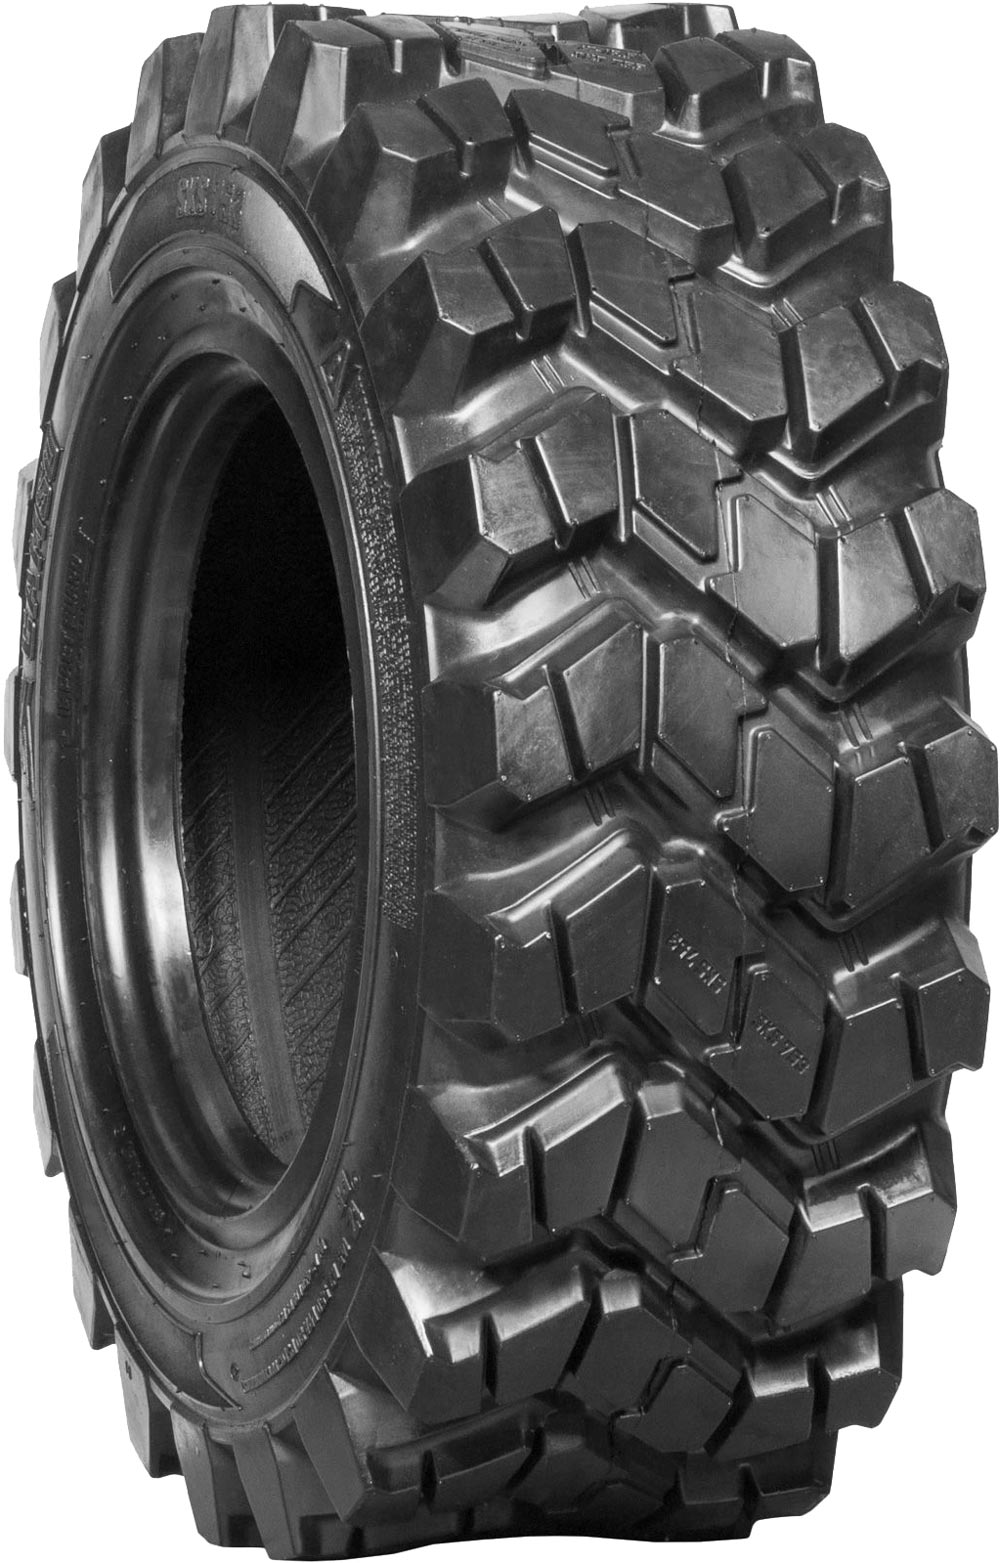 product_type-industrial_tires Camso SKS 753 10PR TL 10 R16.5 N